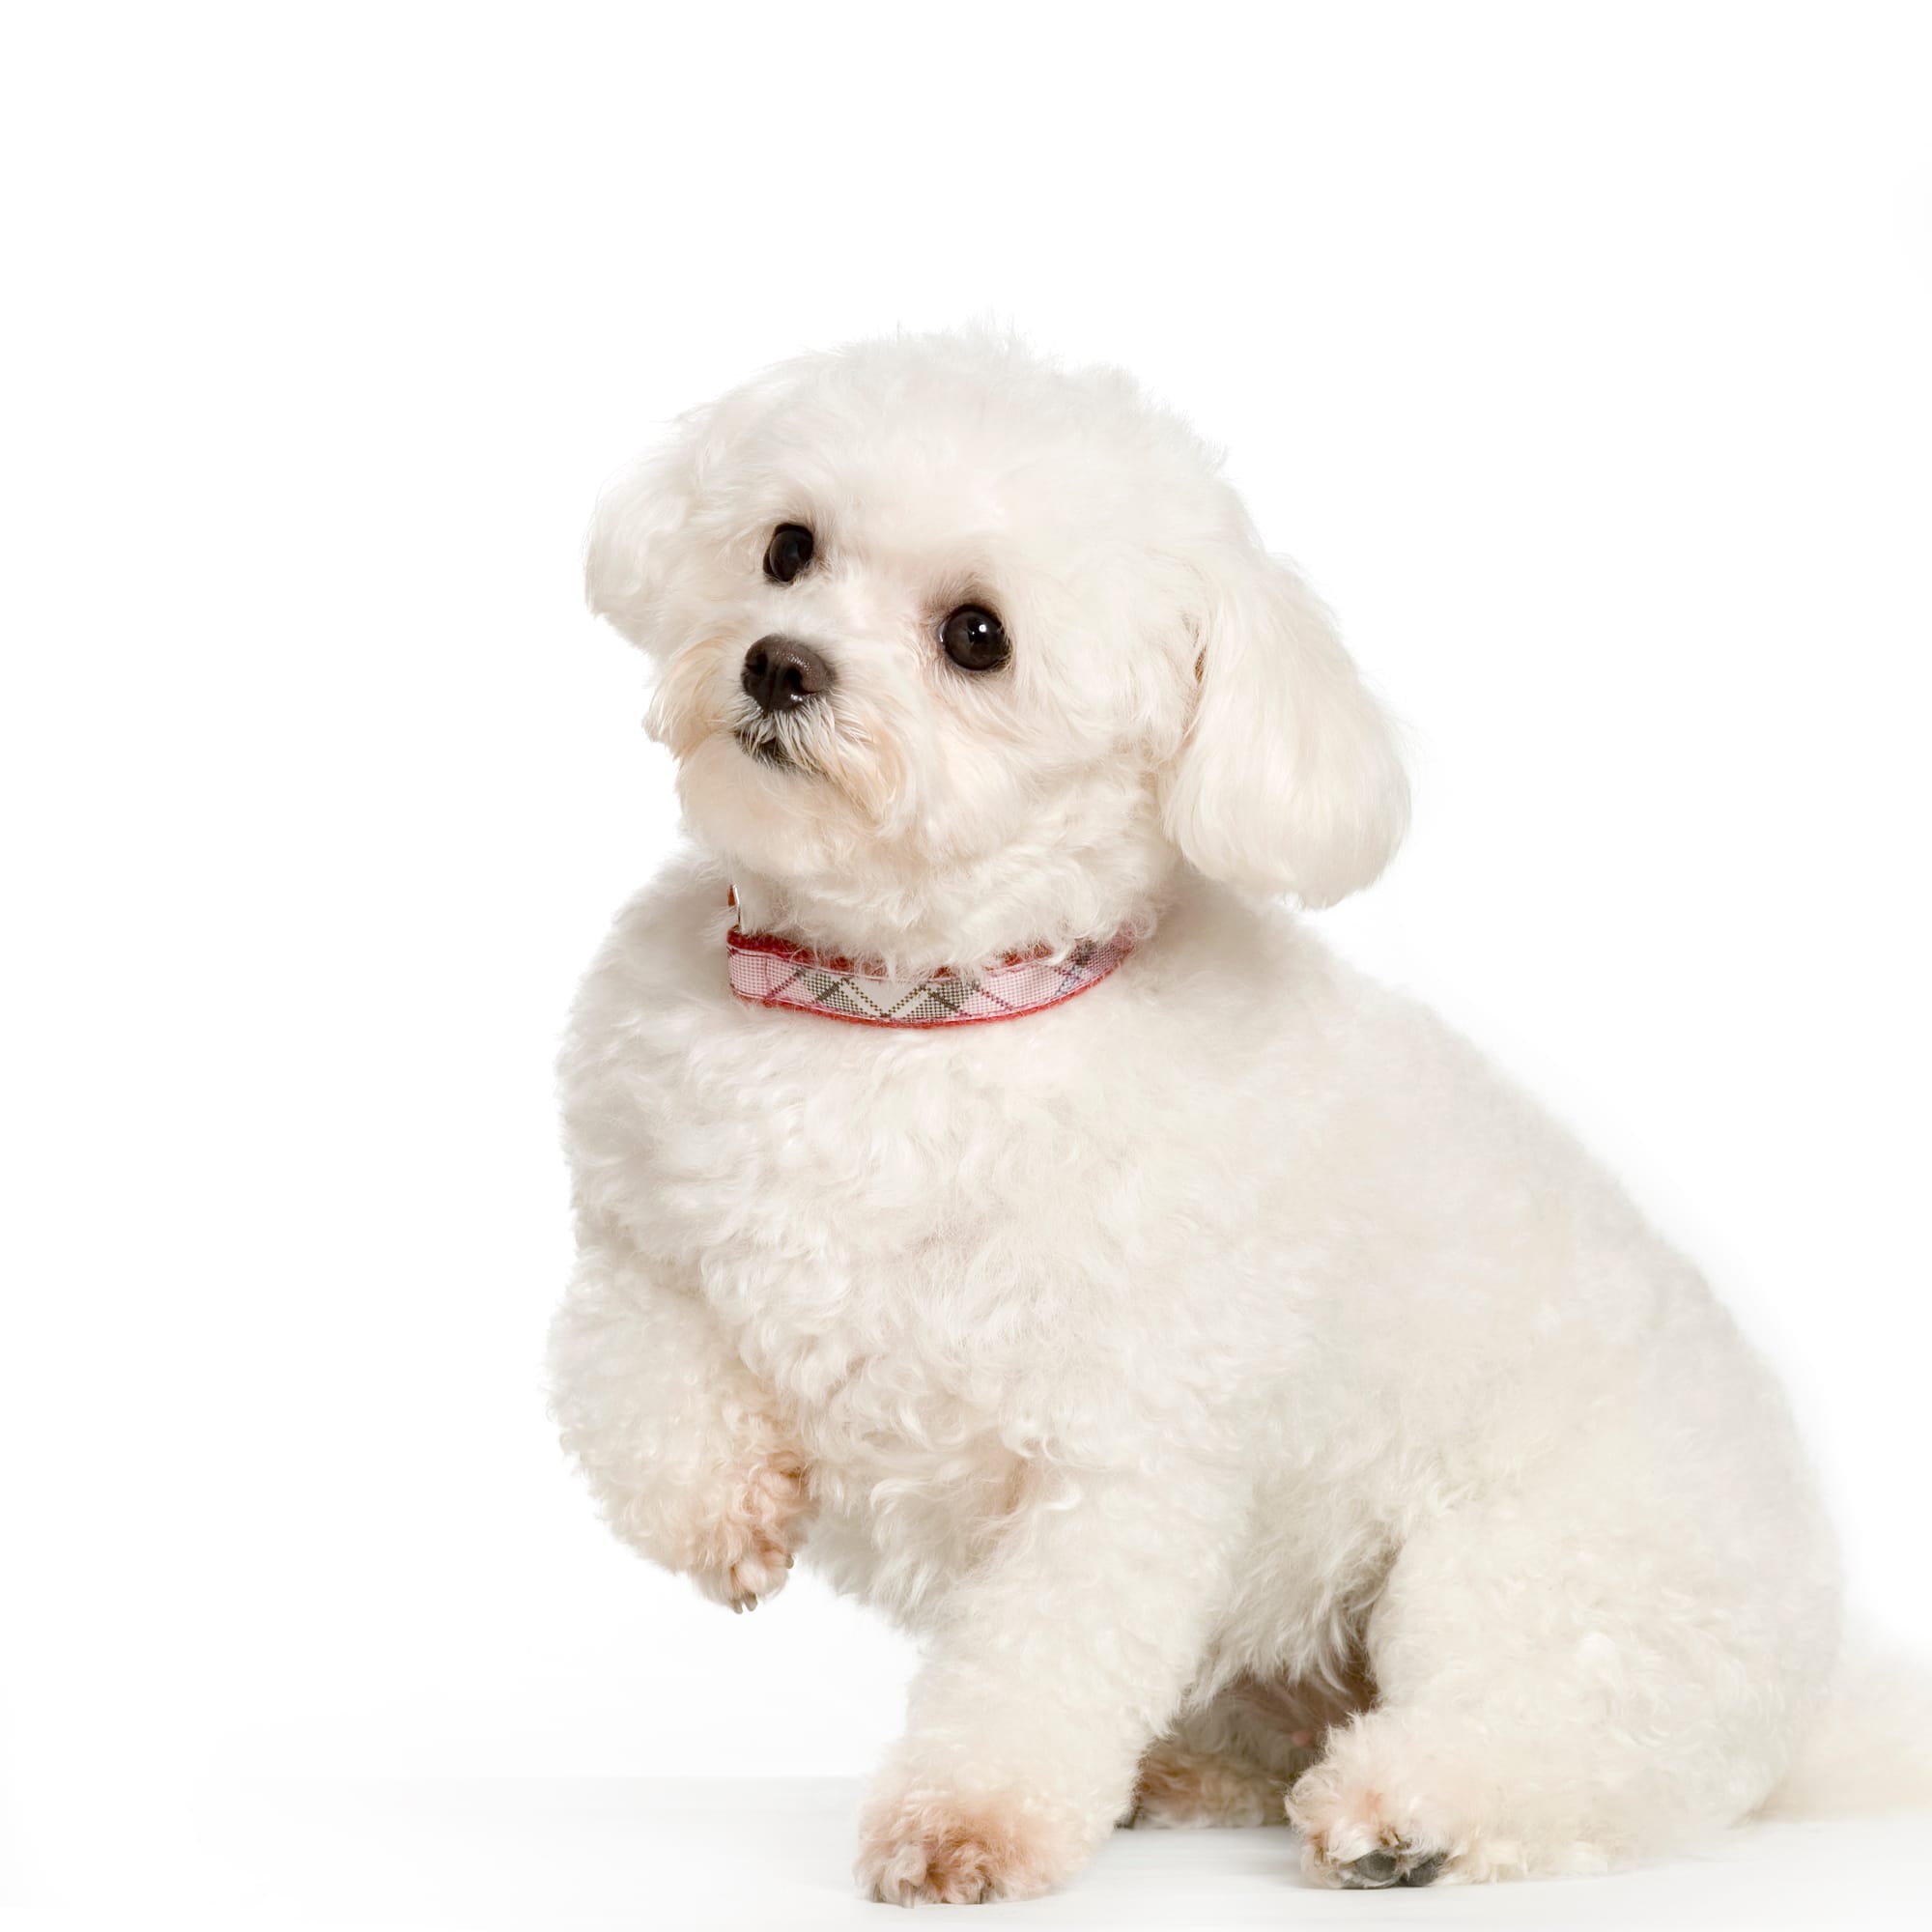 Can Bichon Frise Be Left Alone